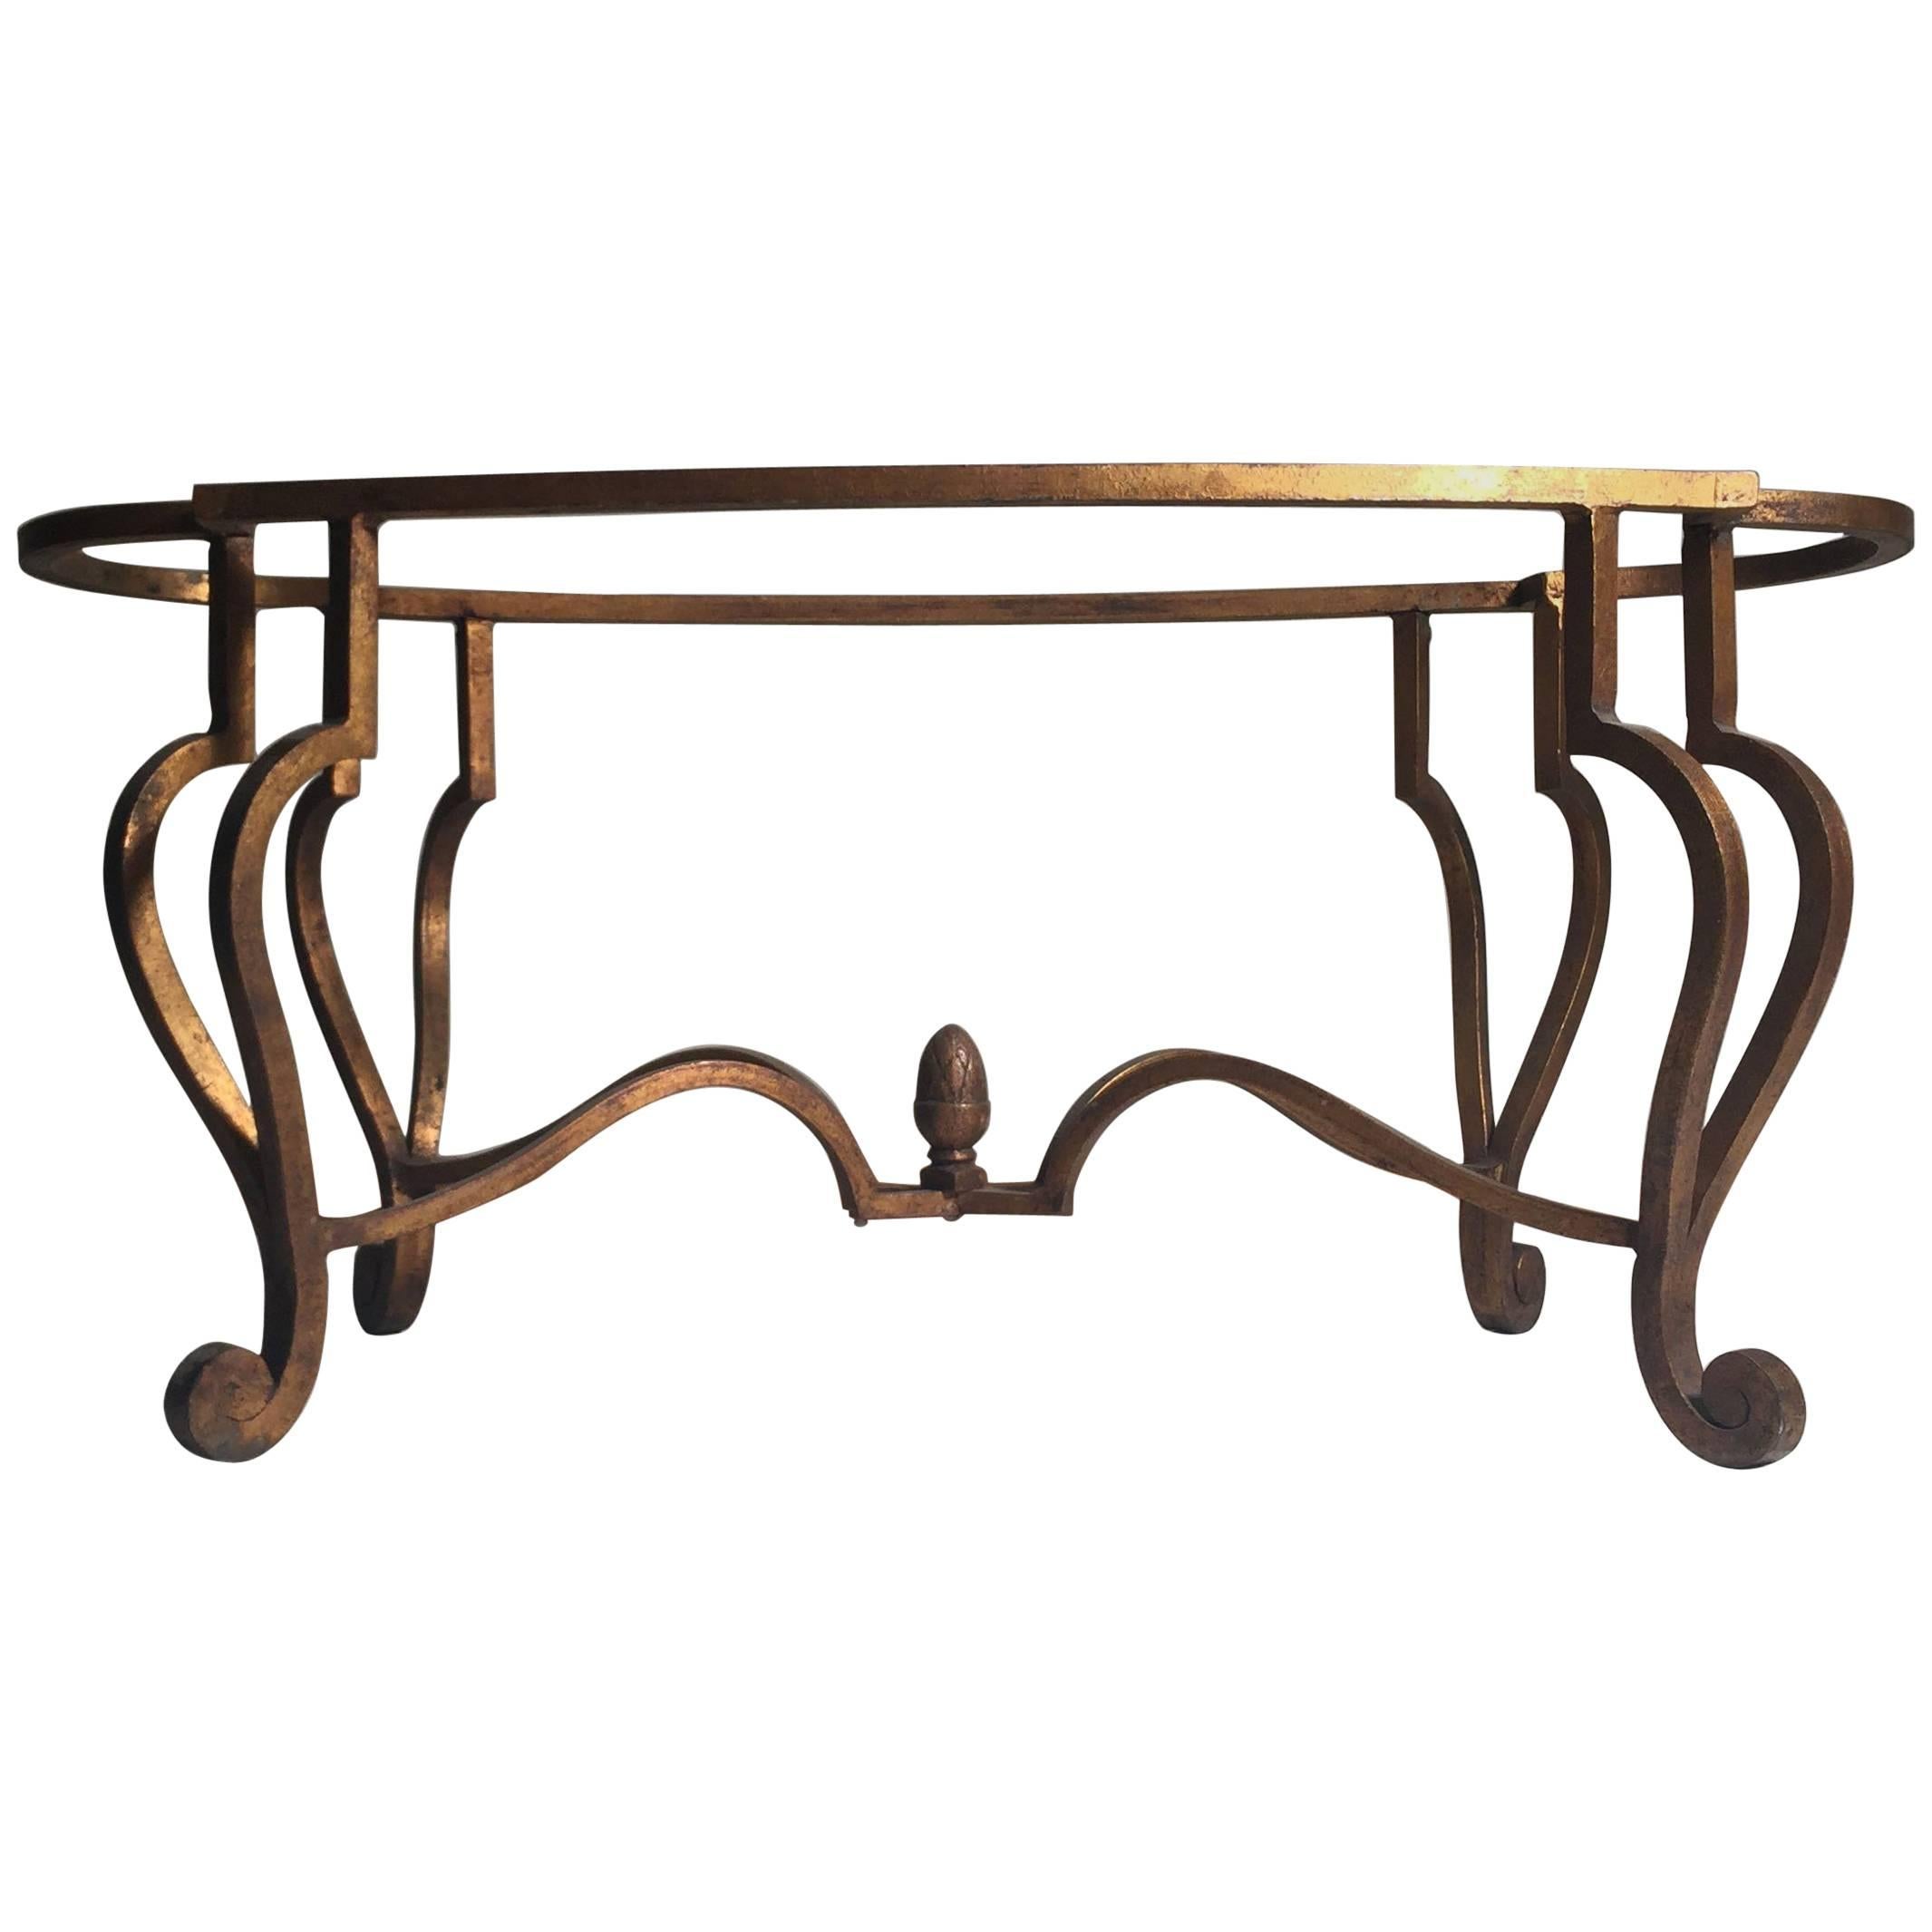 Gilt Wrought Iron Maison Ramsay Coffee Table Frame with Acorn Finial For Sale